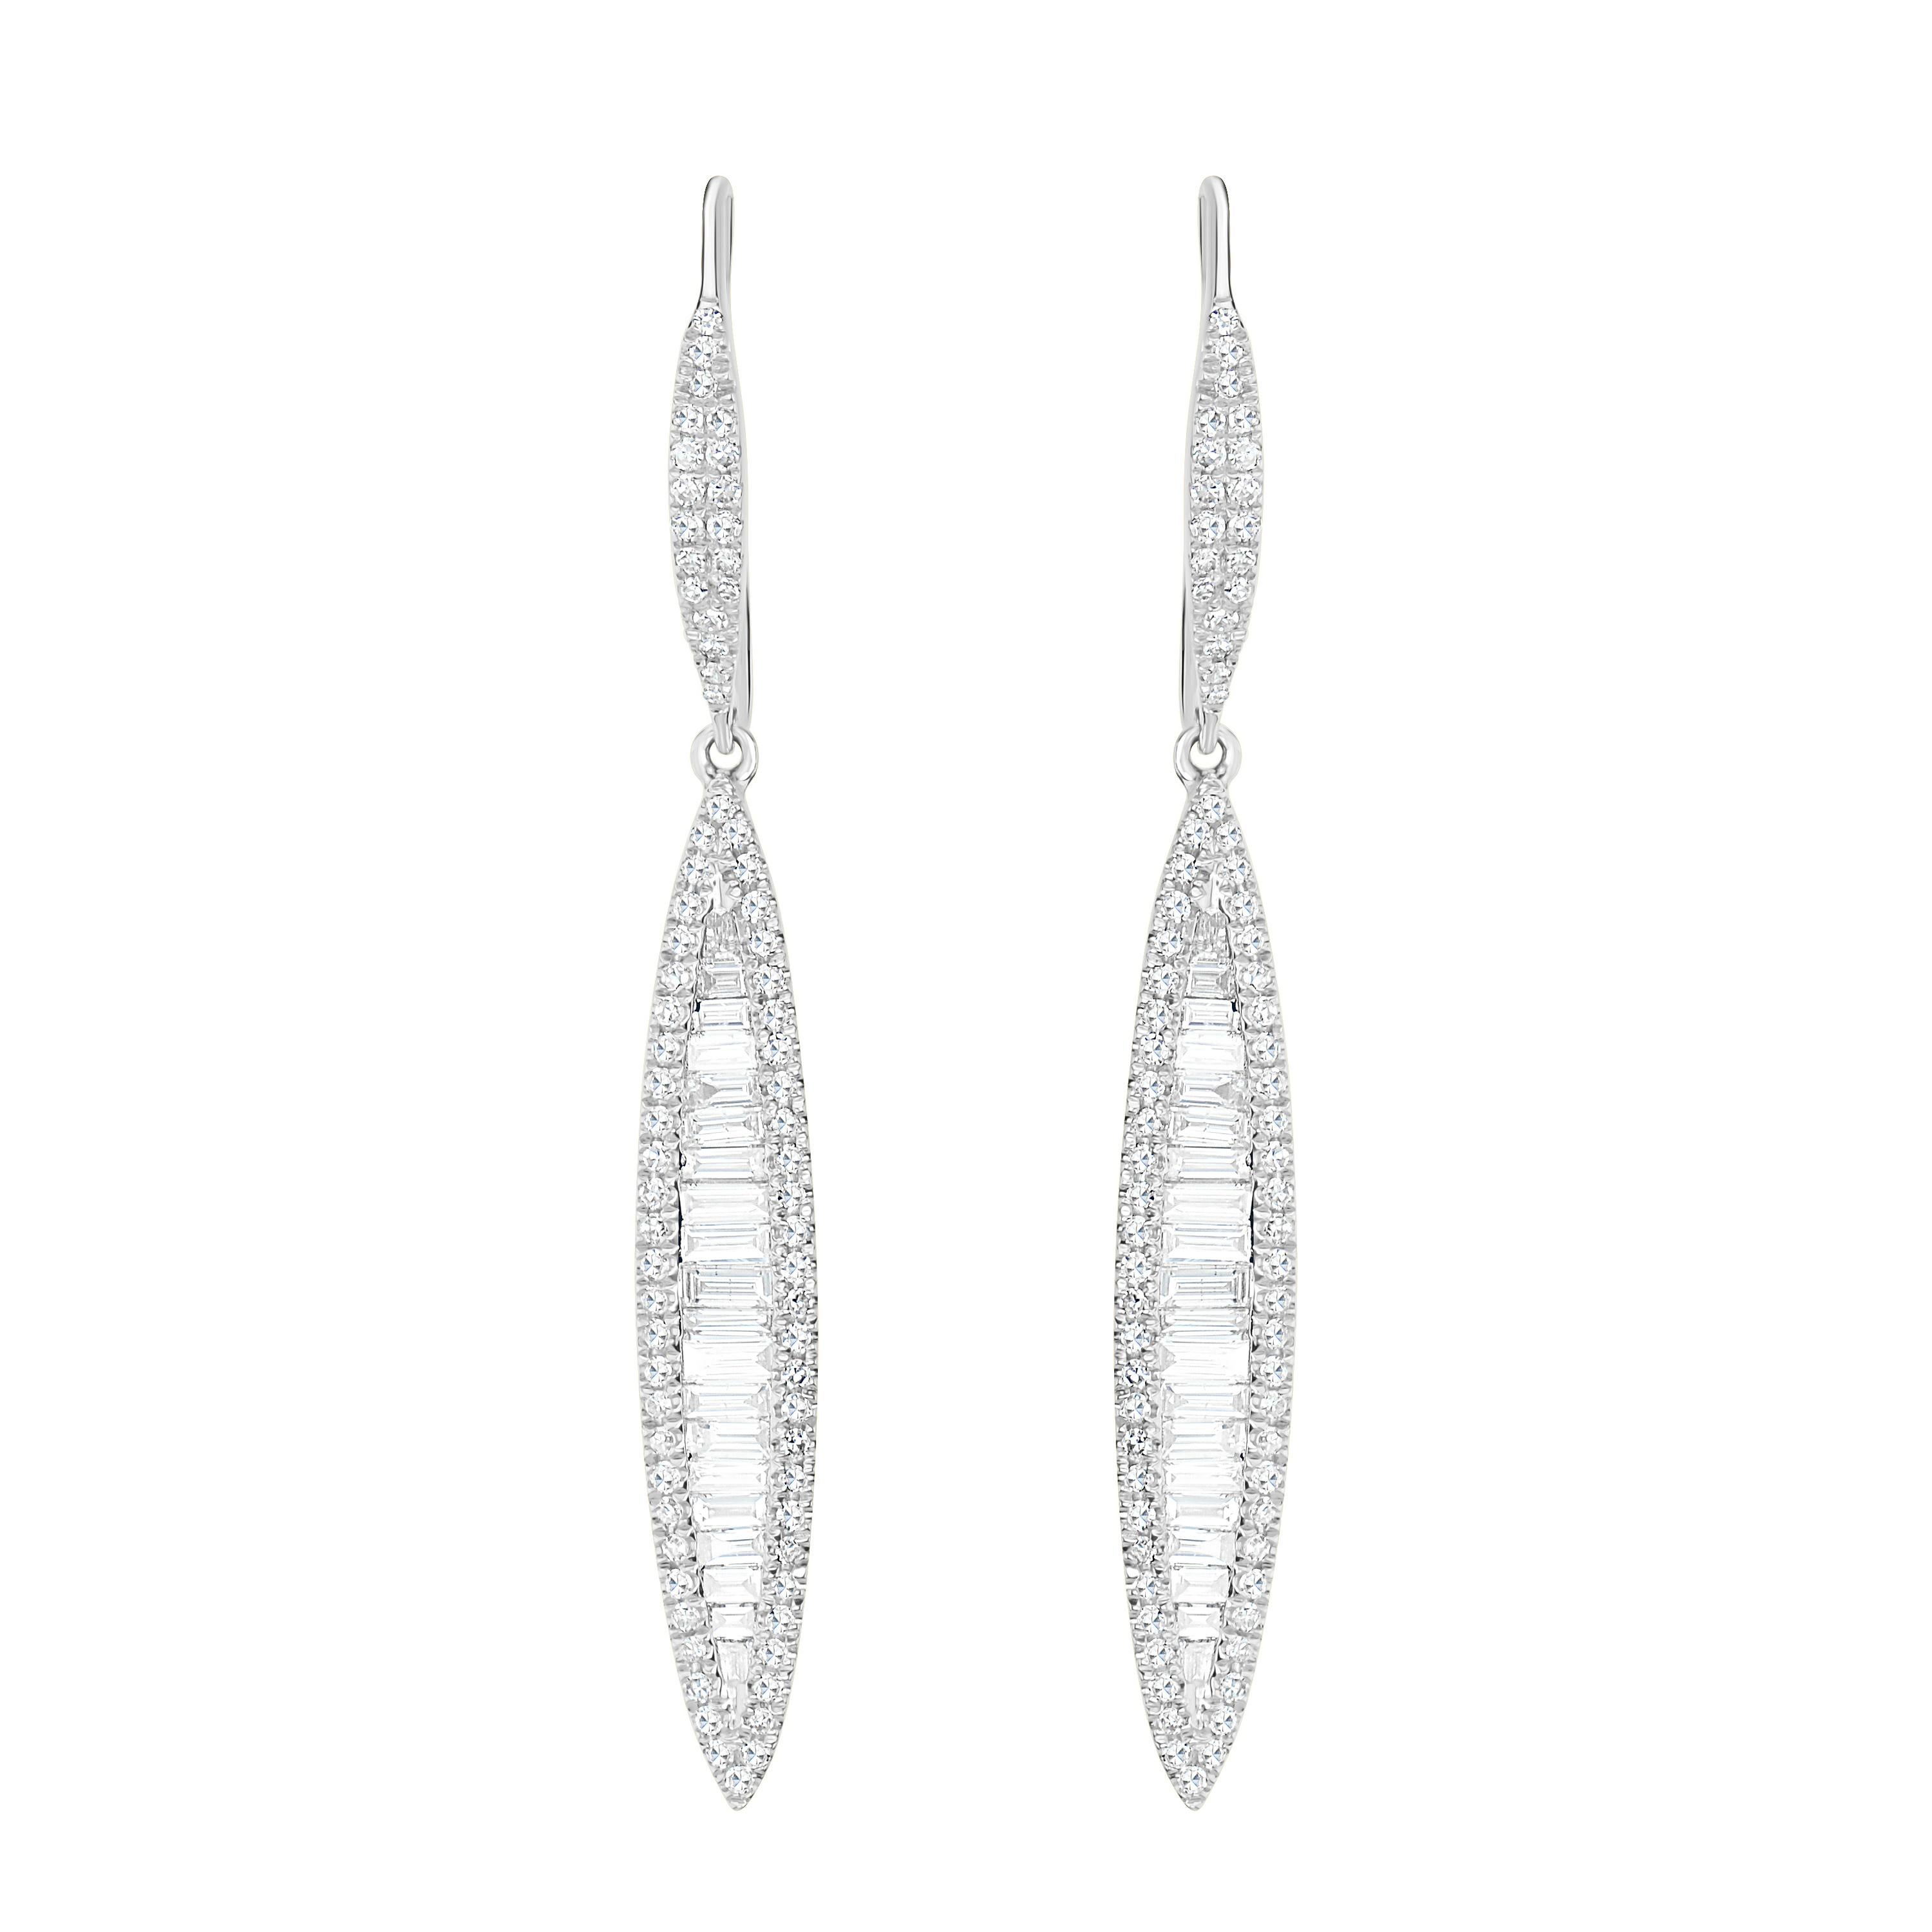 These Luxle stunning linear drop earrings feature a tapering row of baguette diamonds framed within round diamonds in pave. They have an ear wire back.

Please follow the Luxury Jewels storefront to view the latest collections & exclusive one of a